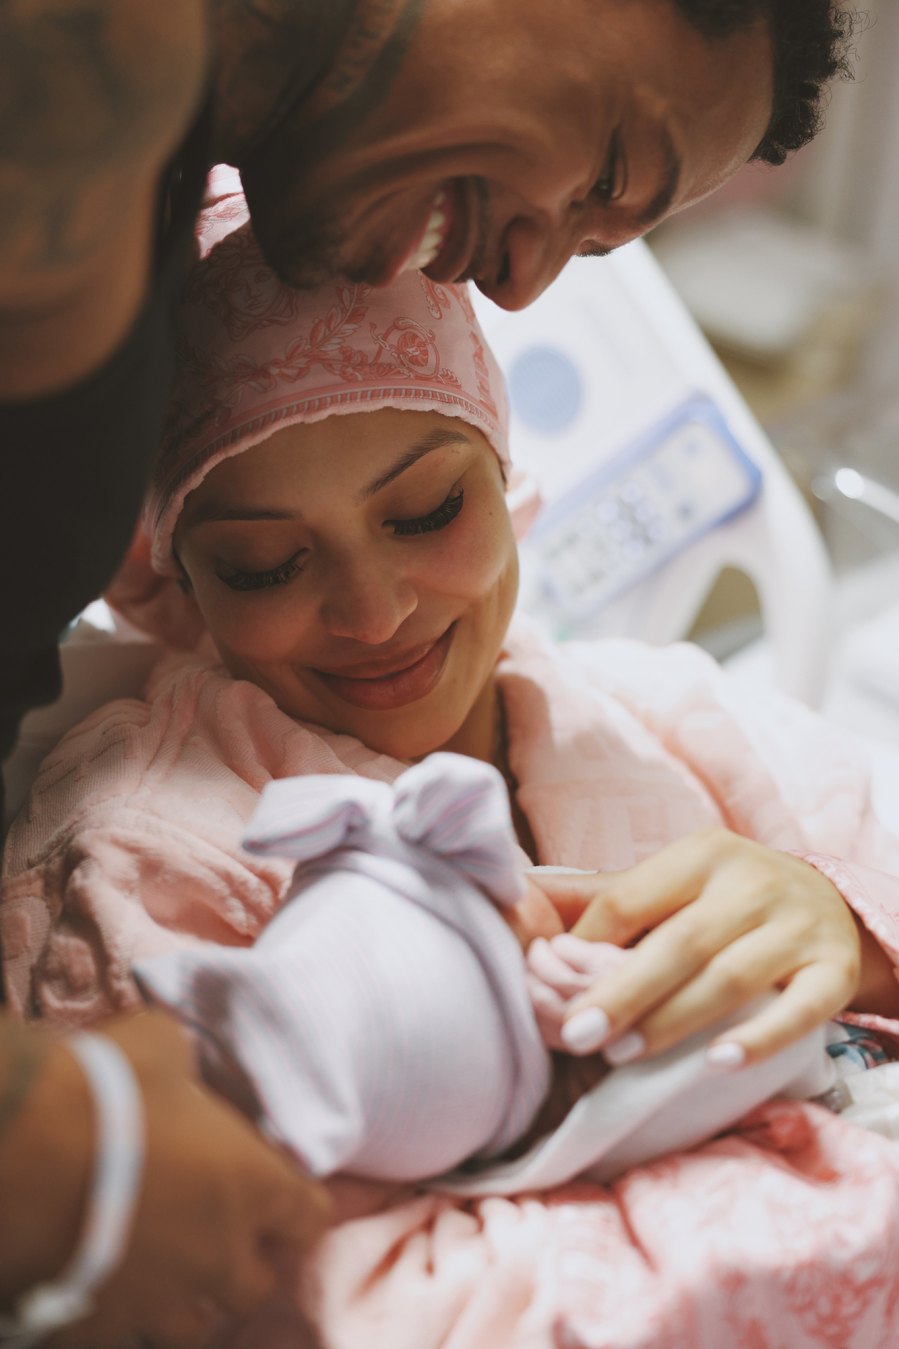 Nick Cannon and Abby De La Rosa Welcome 3rd Child, His 11th: ‘The World Is Yours'